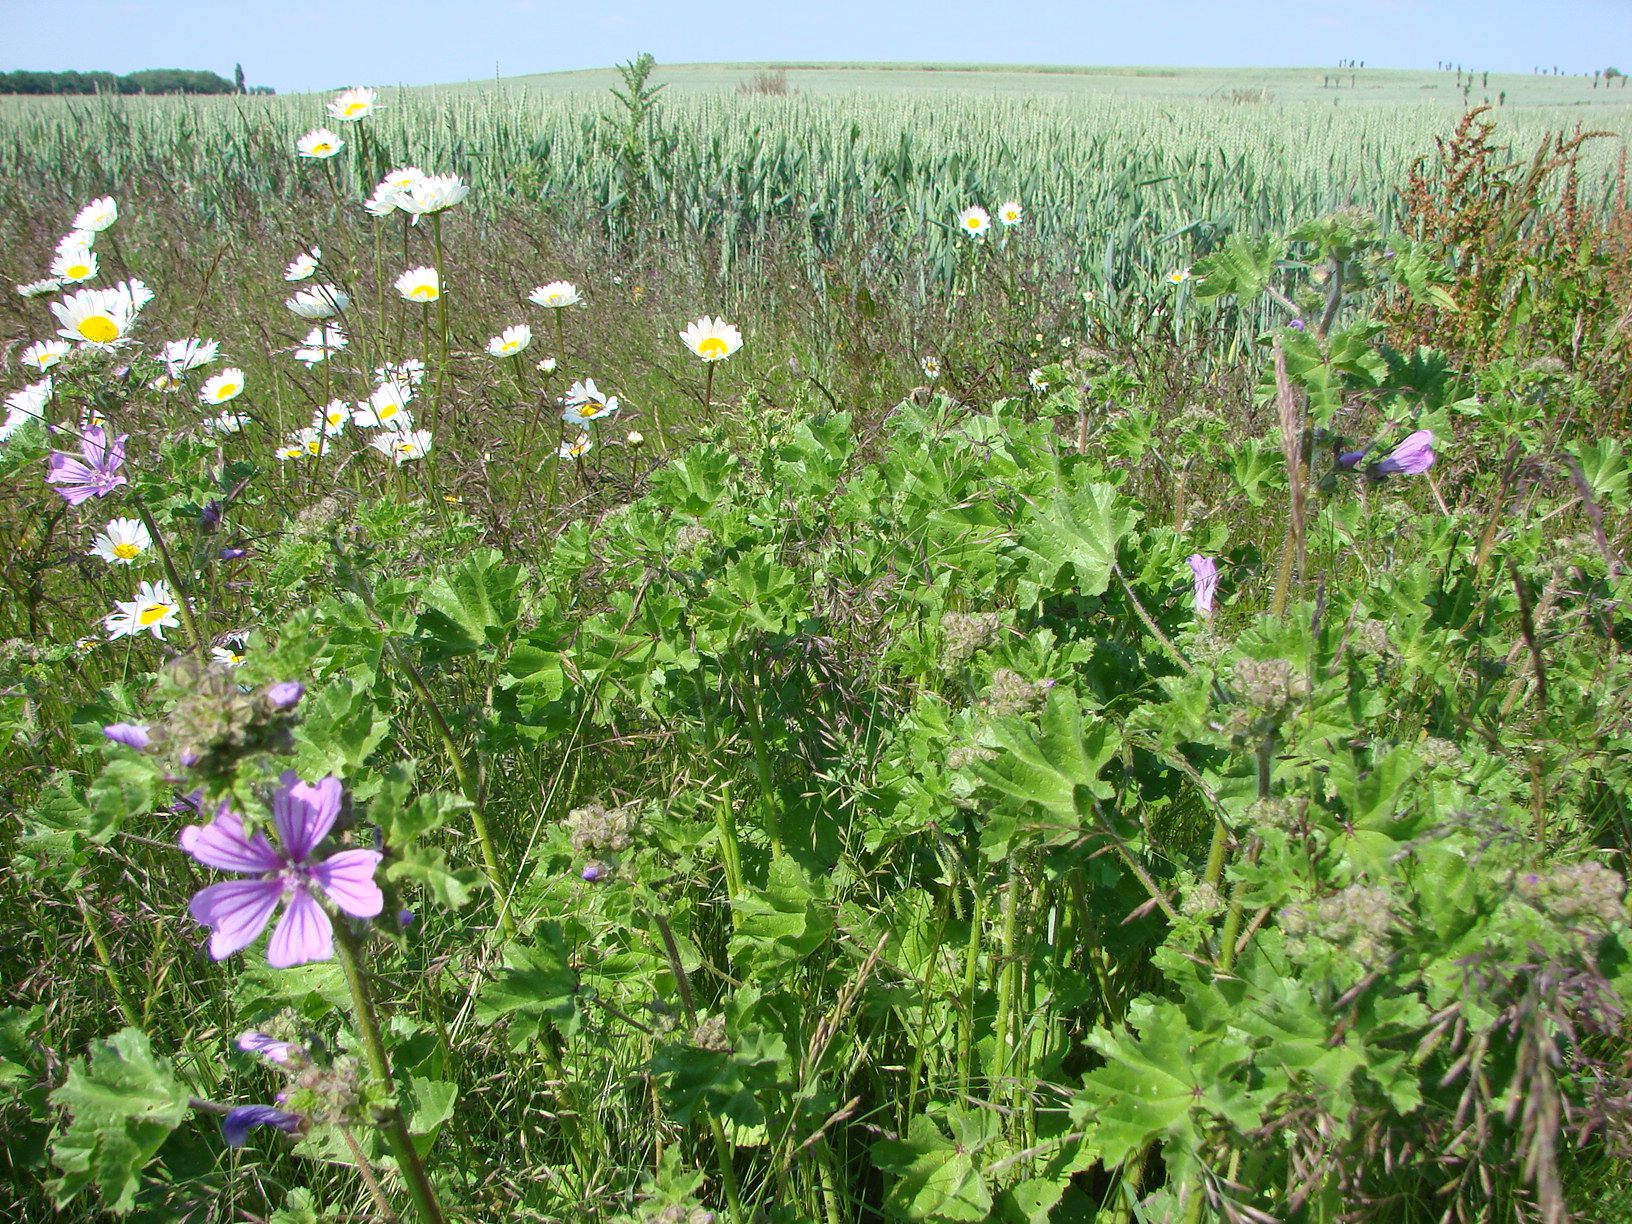 Wildflower strips at the edge of crop fields are being tested in conjunction with intercropping and living mulch to determine their impact on pests, disease and weeds. Image credit - Severin Hatt